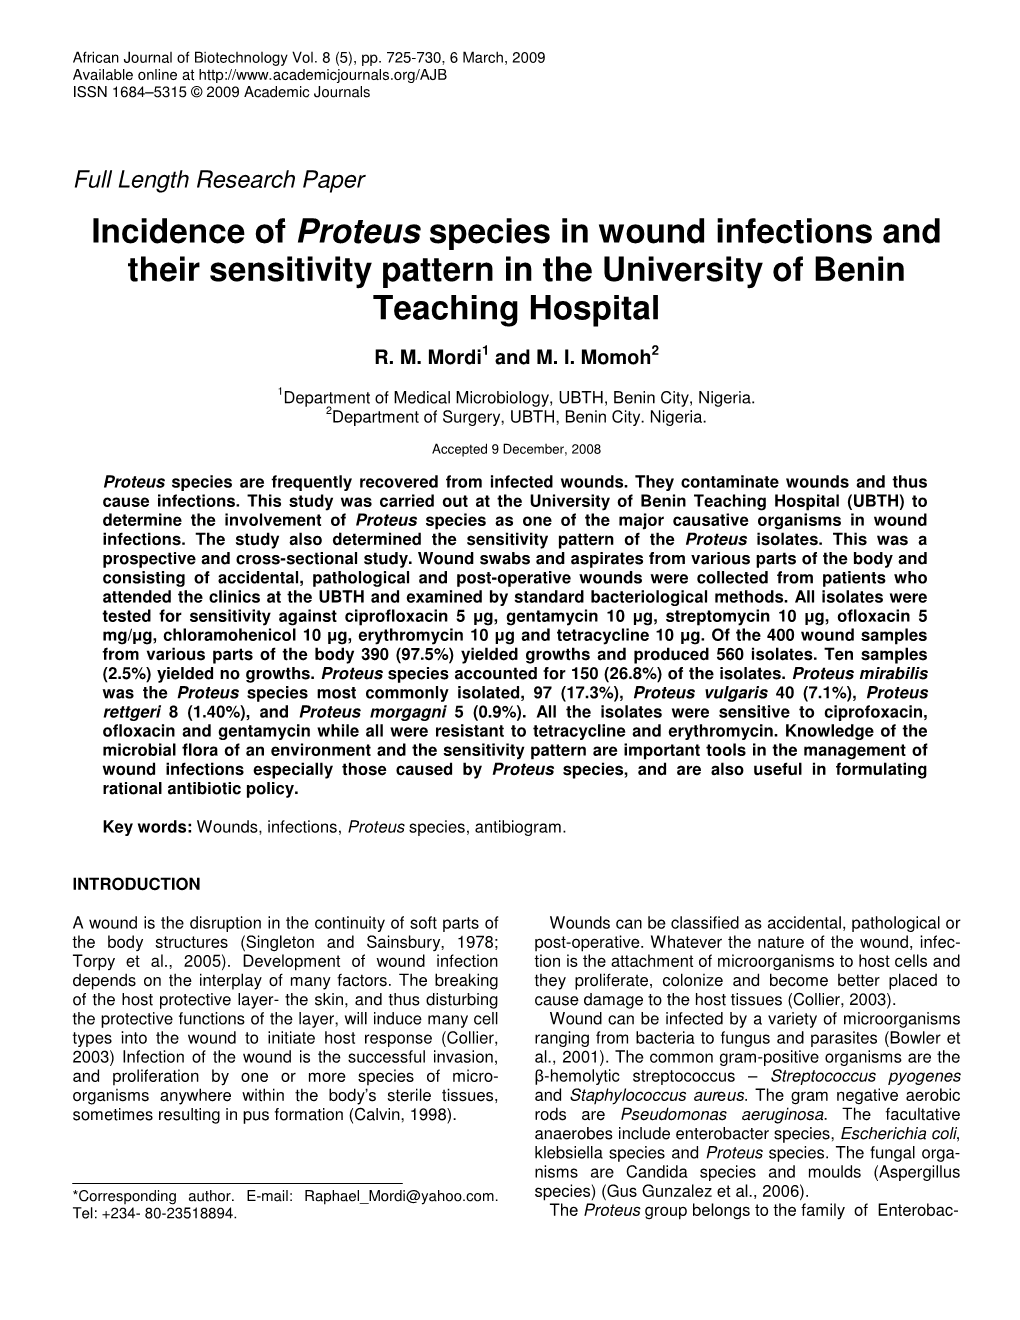 Incidence of Proteus Species in Wound Infections and Their Sensitivity Pattern in the University of Benin Teaching Hospital